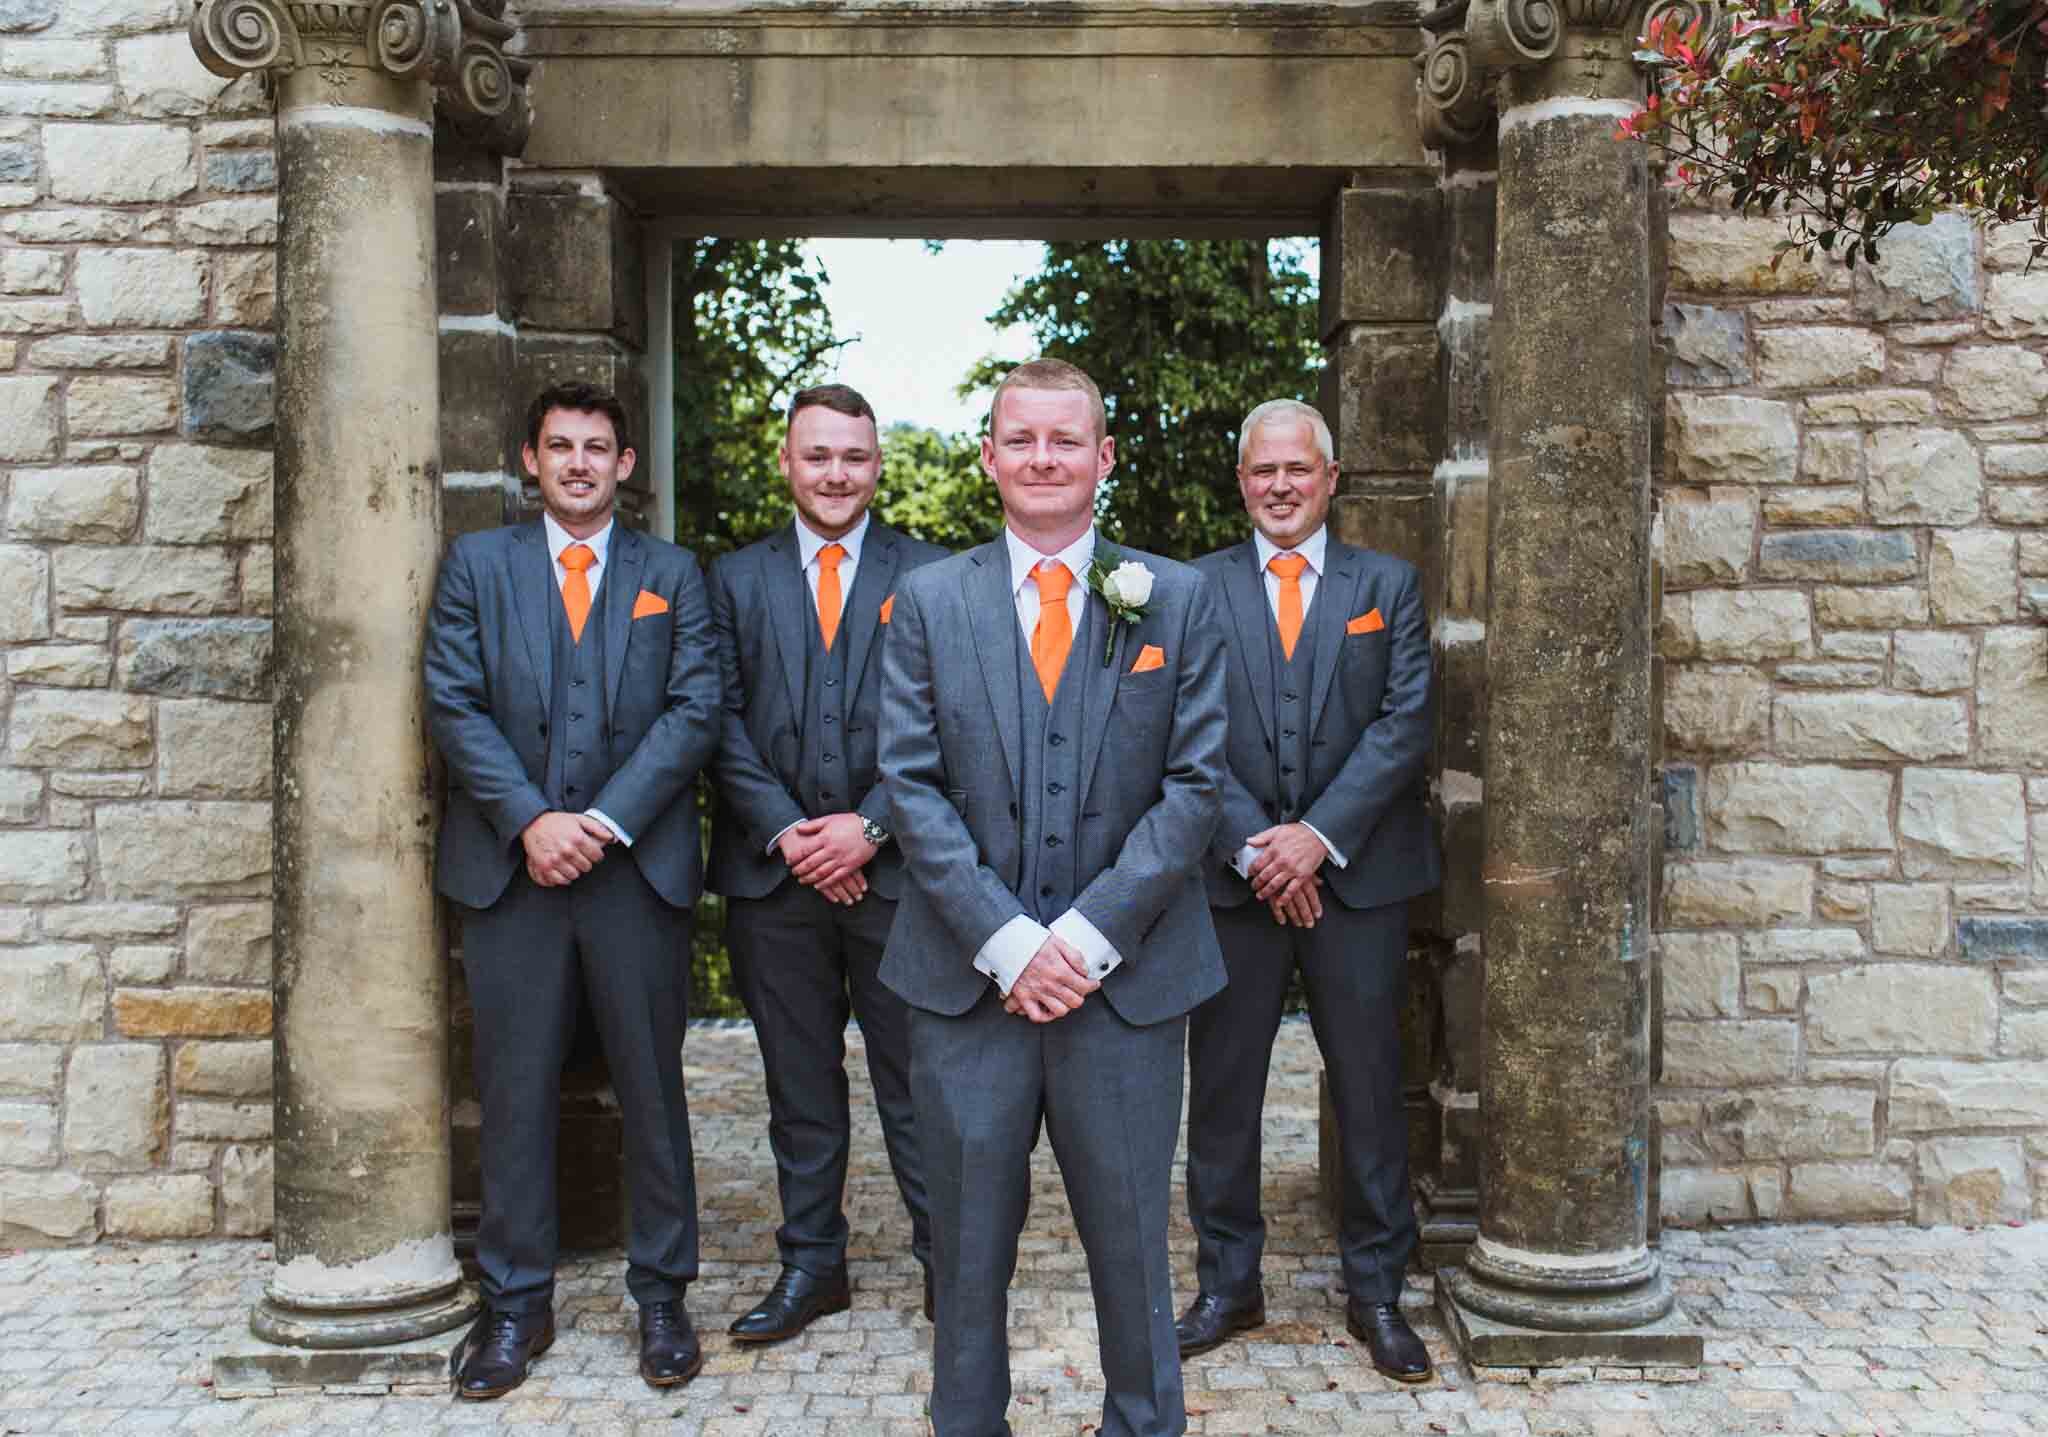  Groomsmen with groom slightly in front holding hands in front of arches and pillars in hotel gardens. 